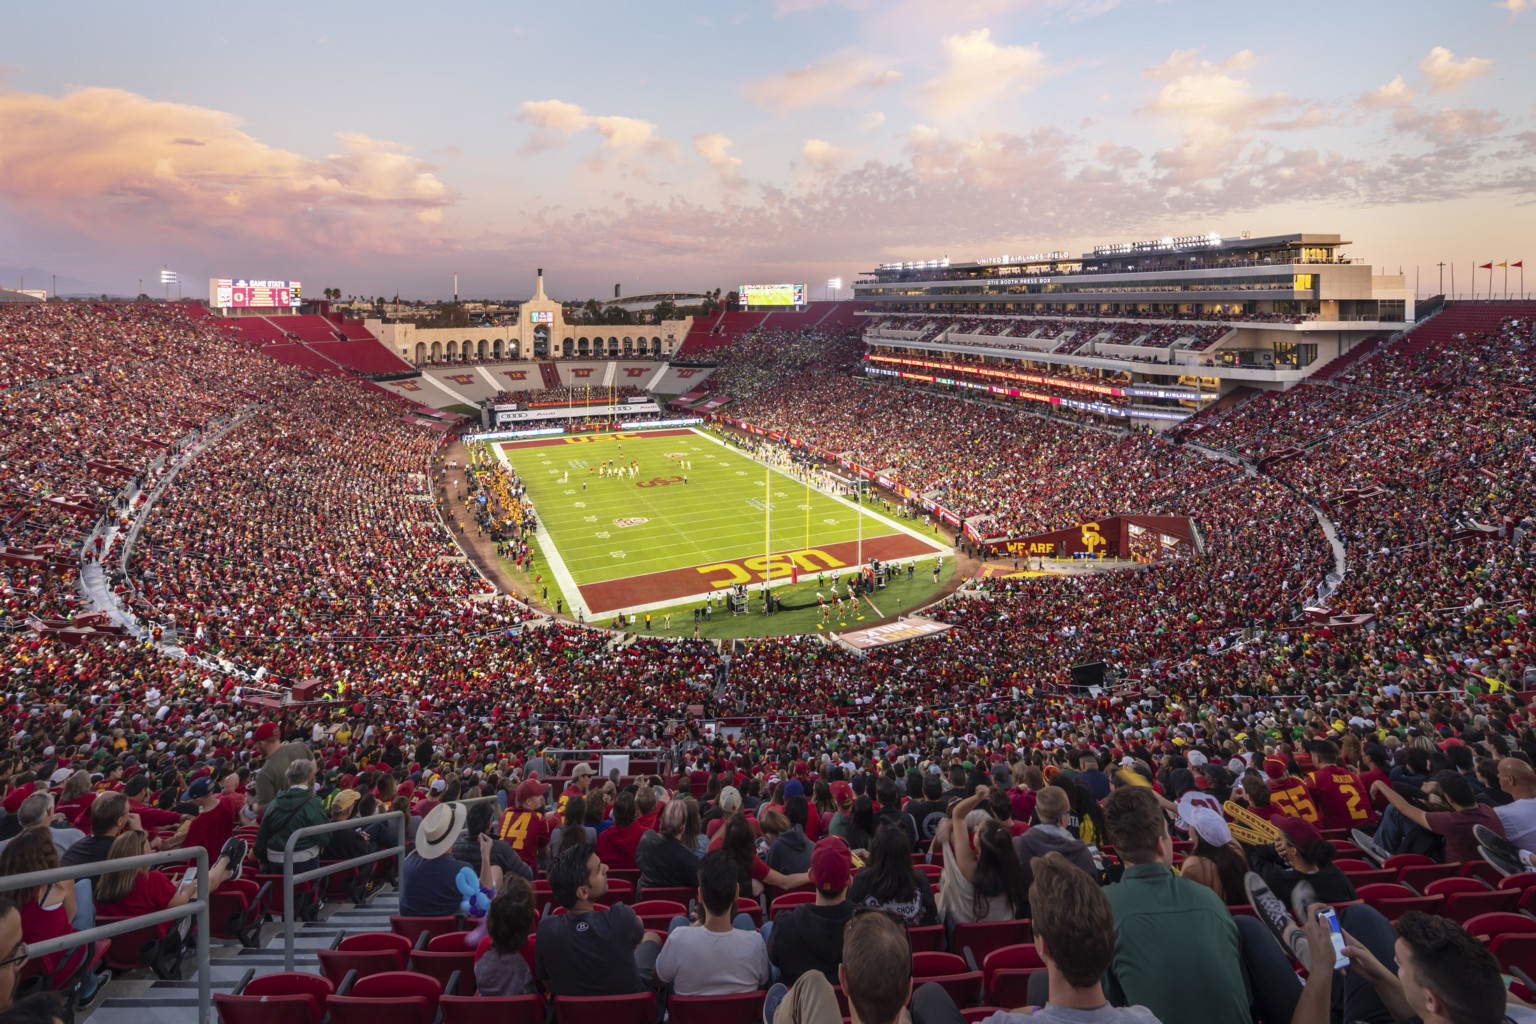 University of Southern California Los Angeles Memorial Coliseum with full bleachers on game day